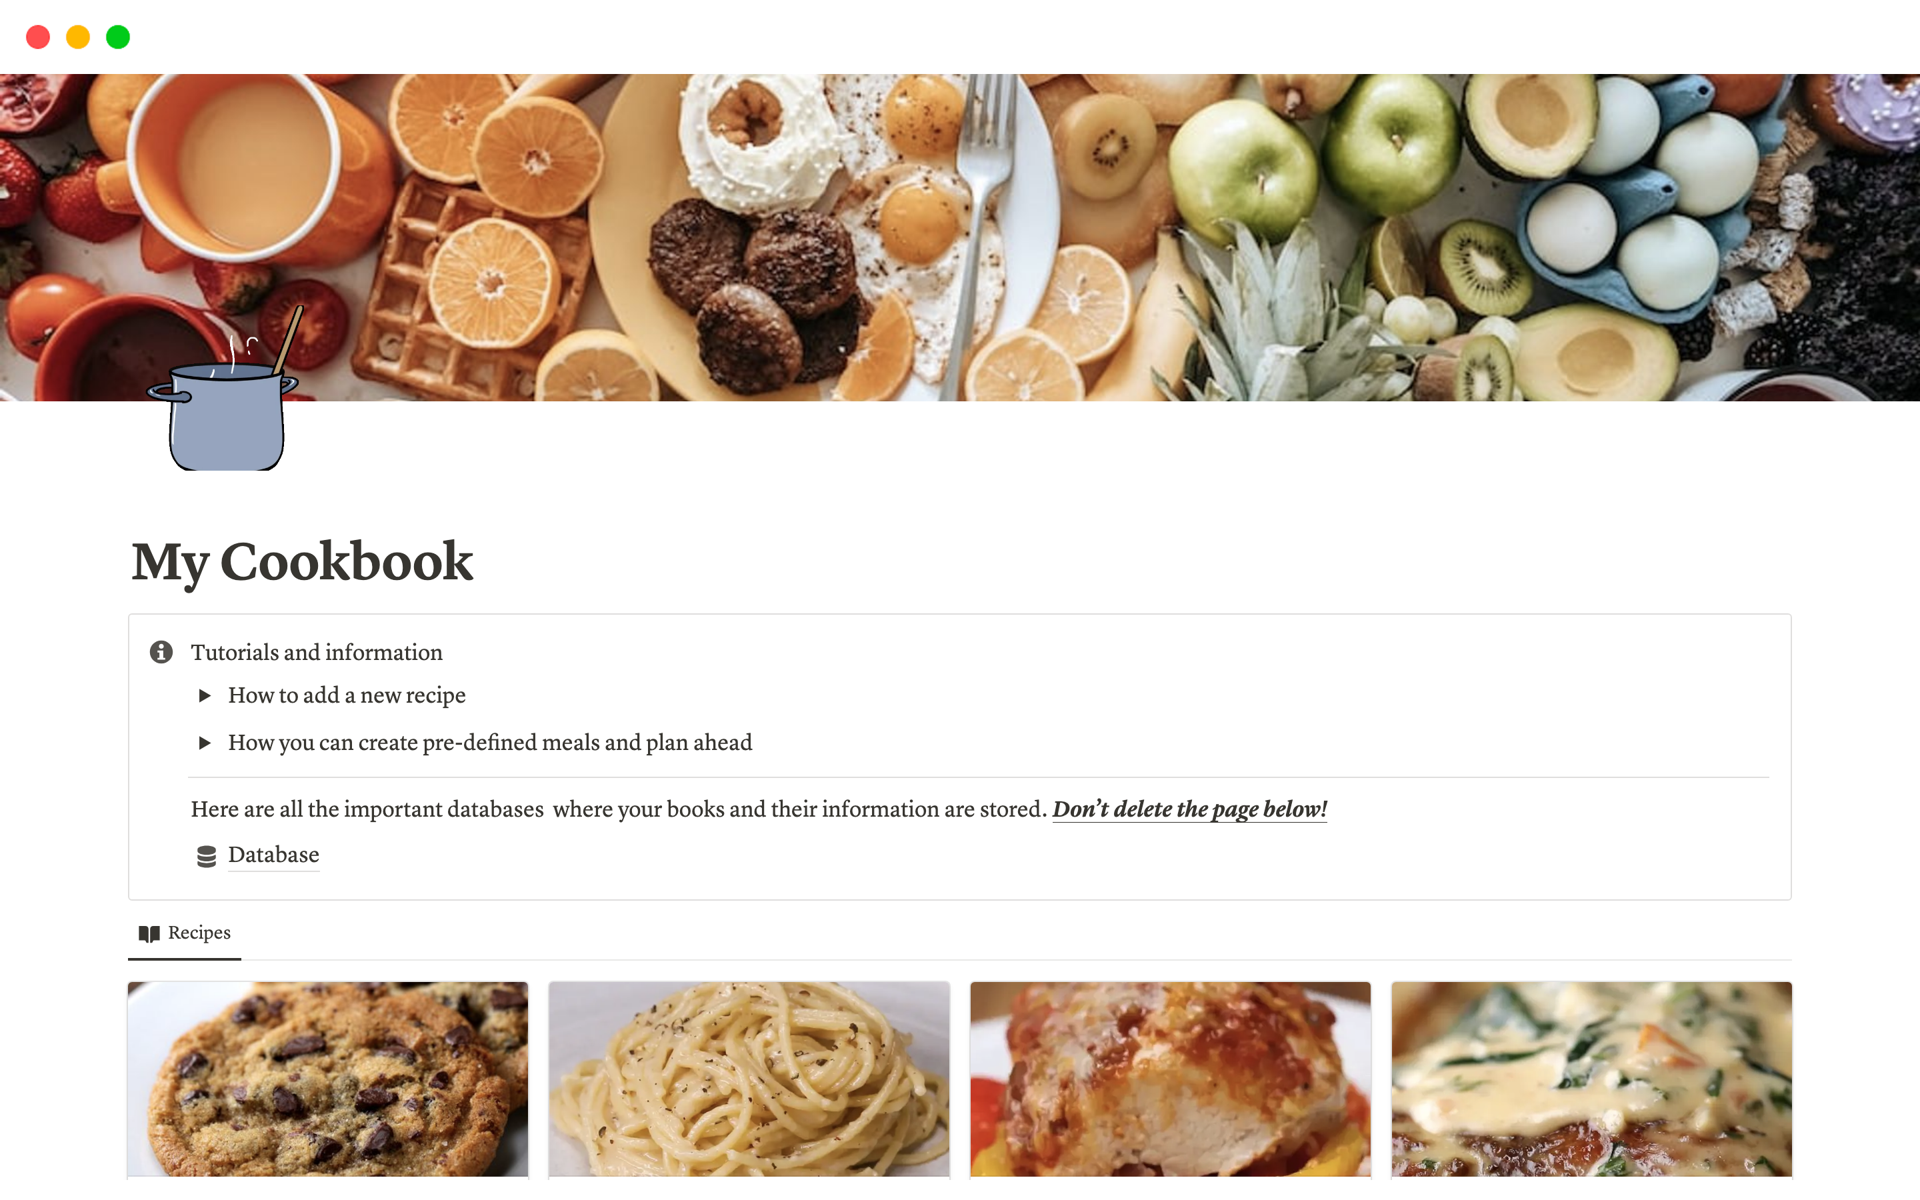 Introducing the ultimate Notion Cookbook Template - effortlessly access and store recipes, plan meals with a meal planner, manage pantry ingredients, and automatically generate precise grocery lists. Simplify your culinary journey today!